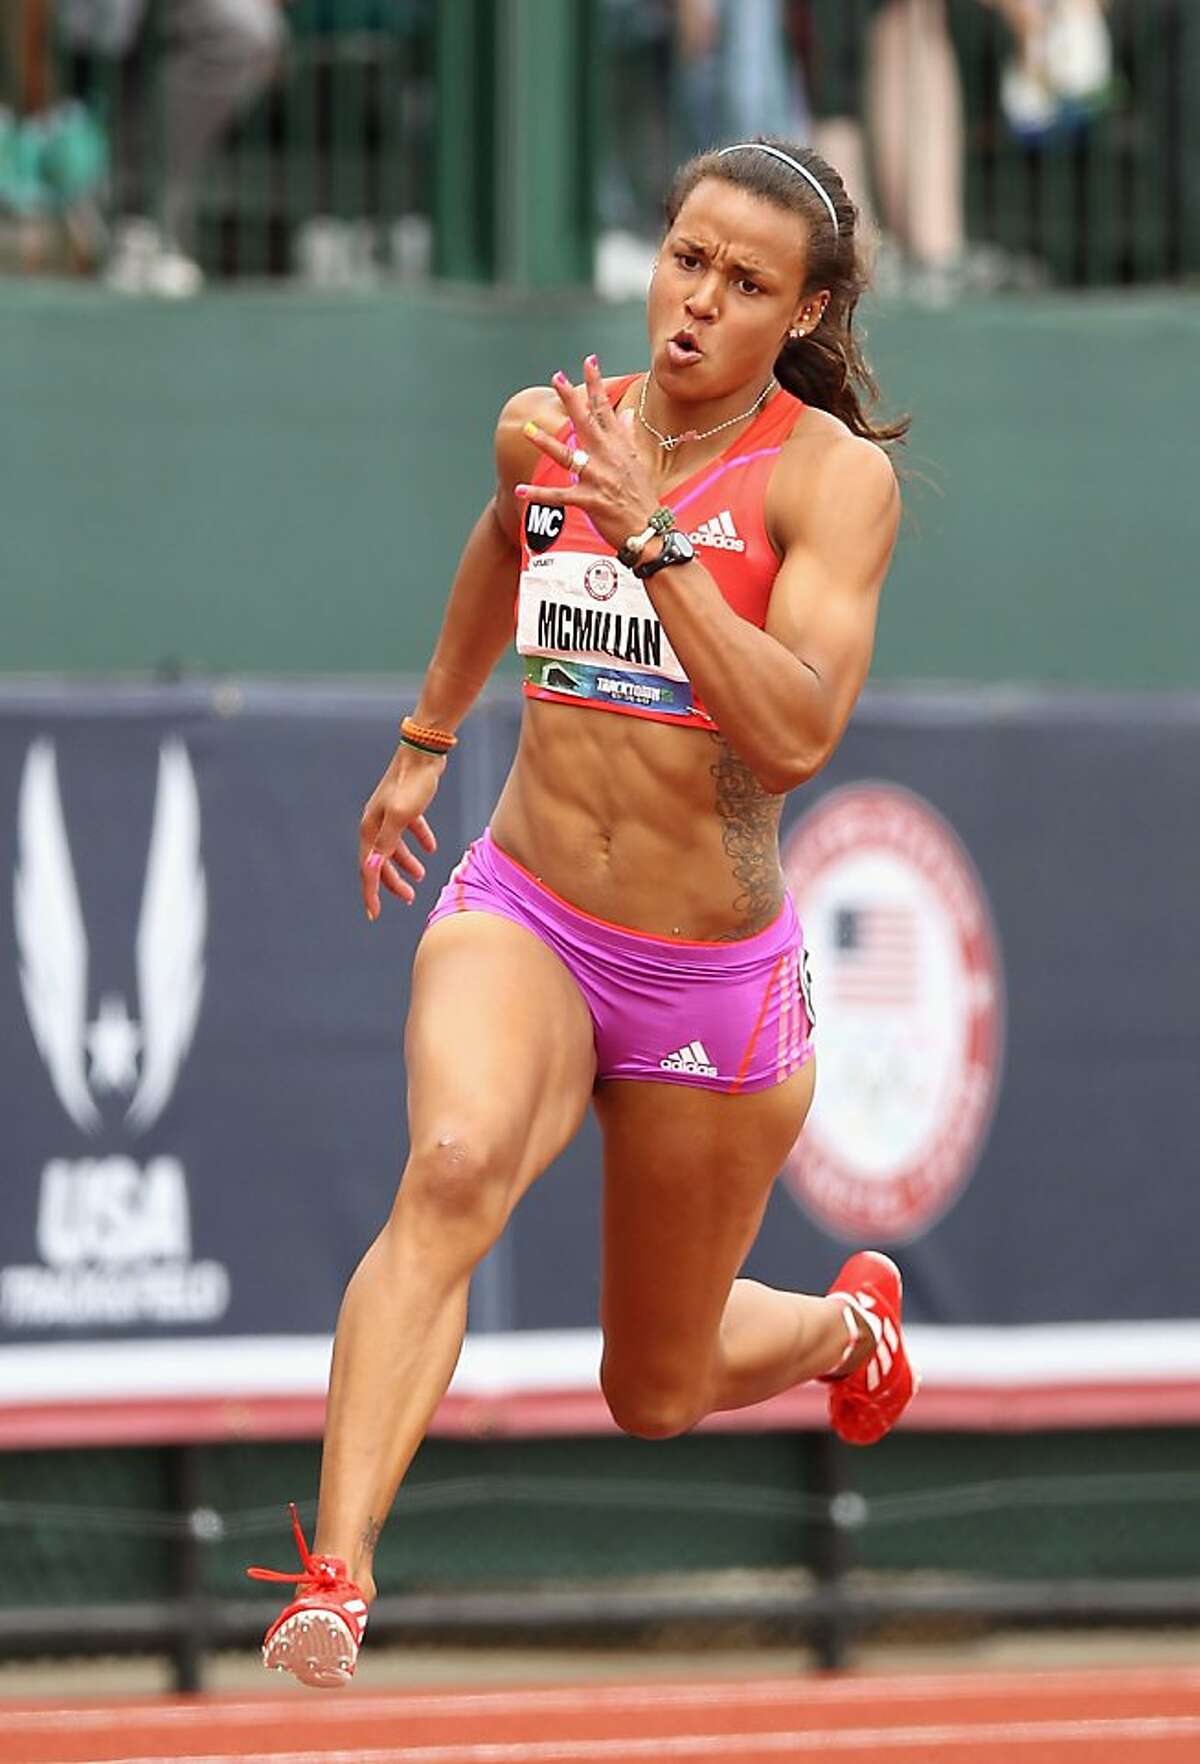 OR - JUNE 29: (CORRECTED VERSION) Chantae McMillan competes in the Heptathl...